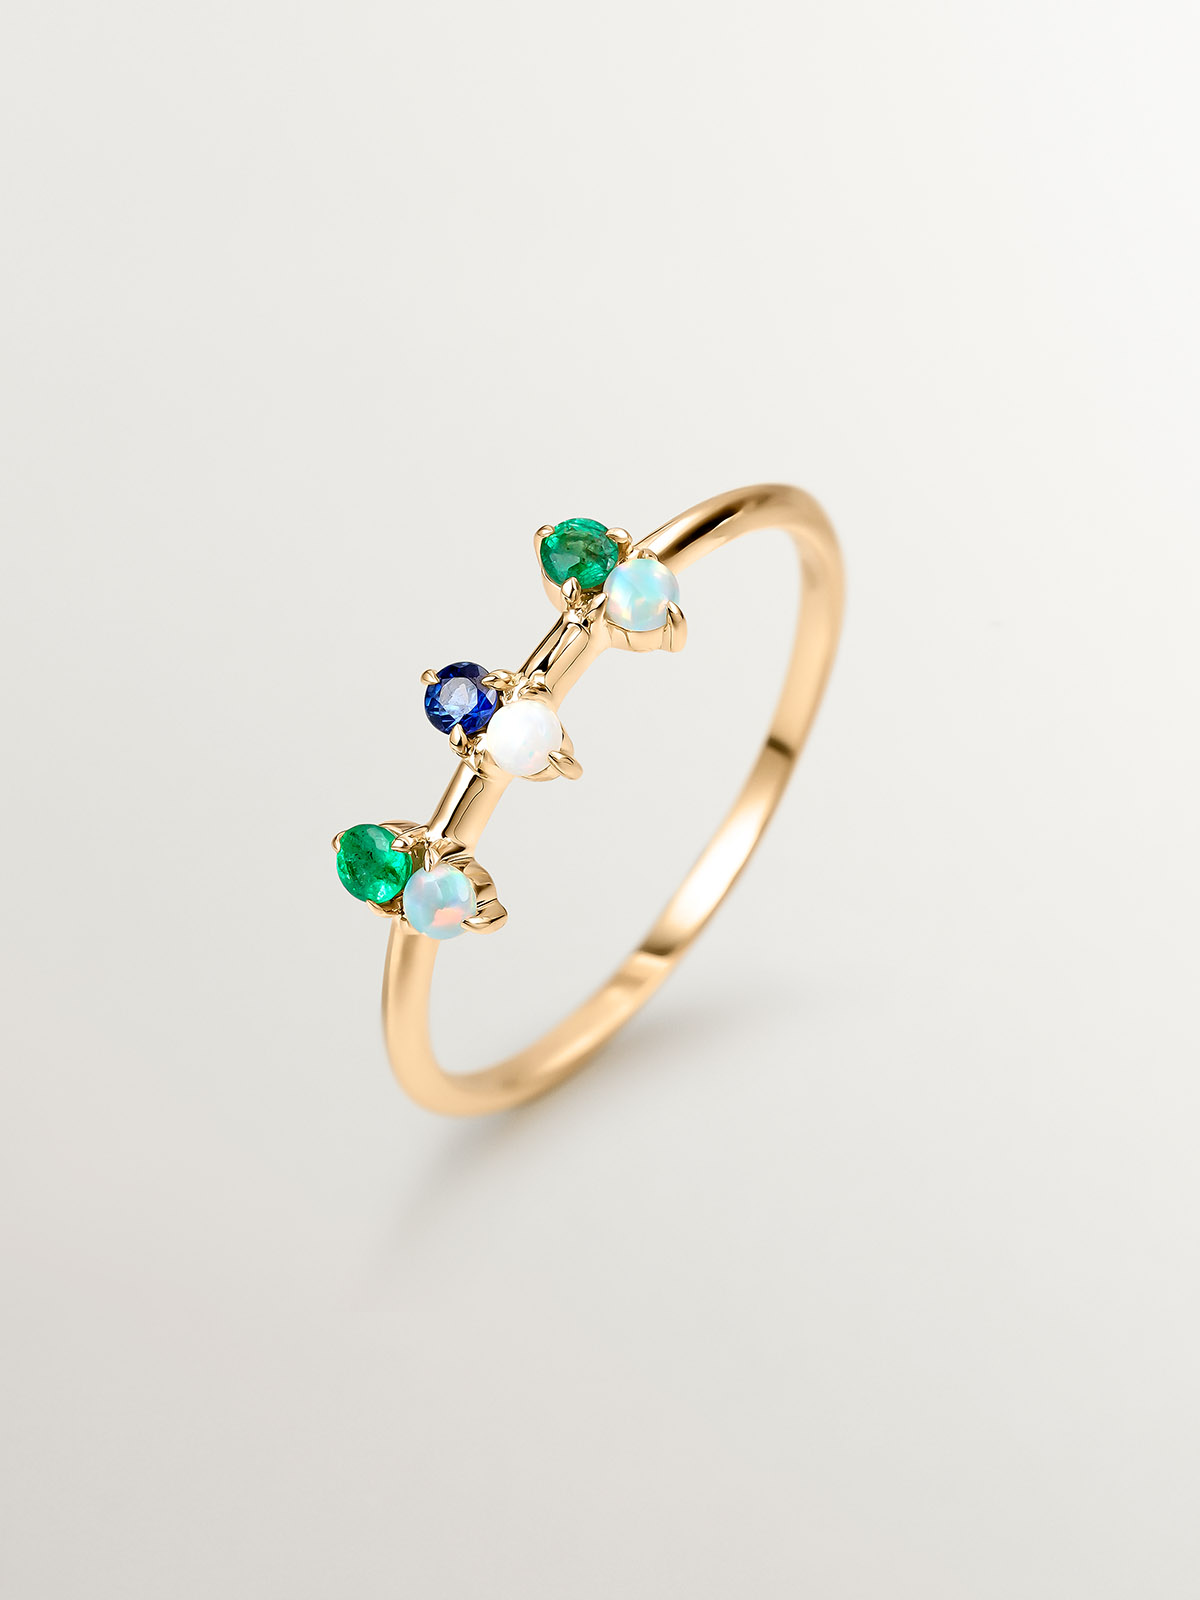 18K yellow gold ring with blue opal and white diamonds.